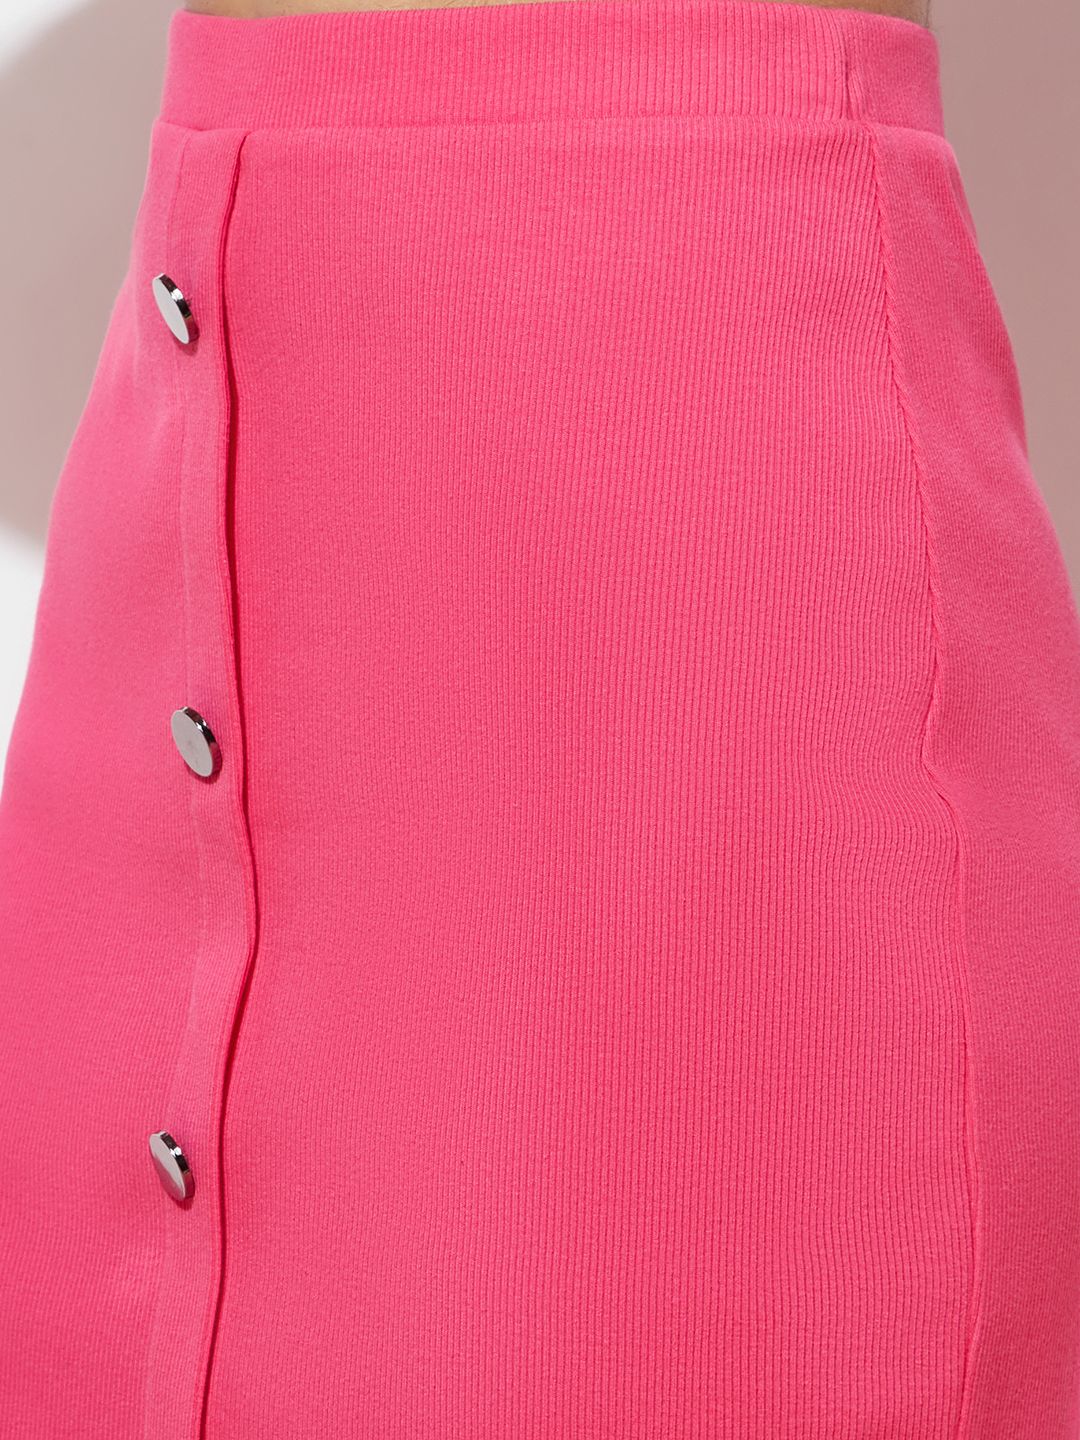 Crew-Neck Ribbed Bright Pink Crop Top and Skirt Set with Button Detail